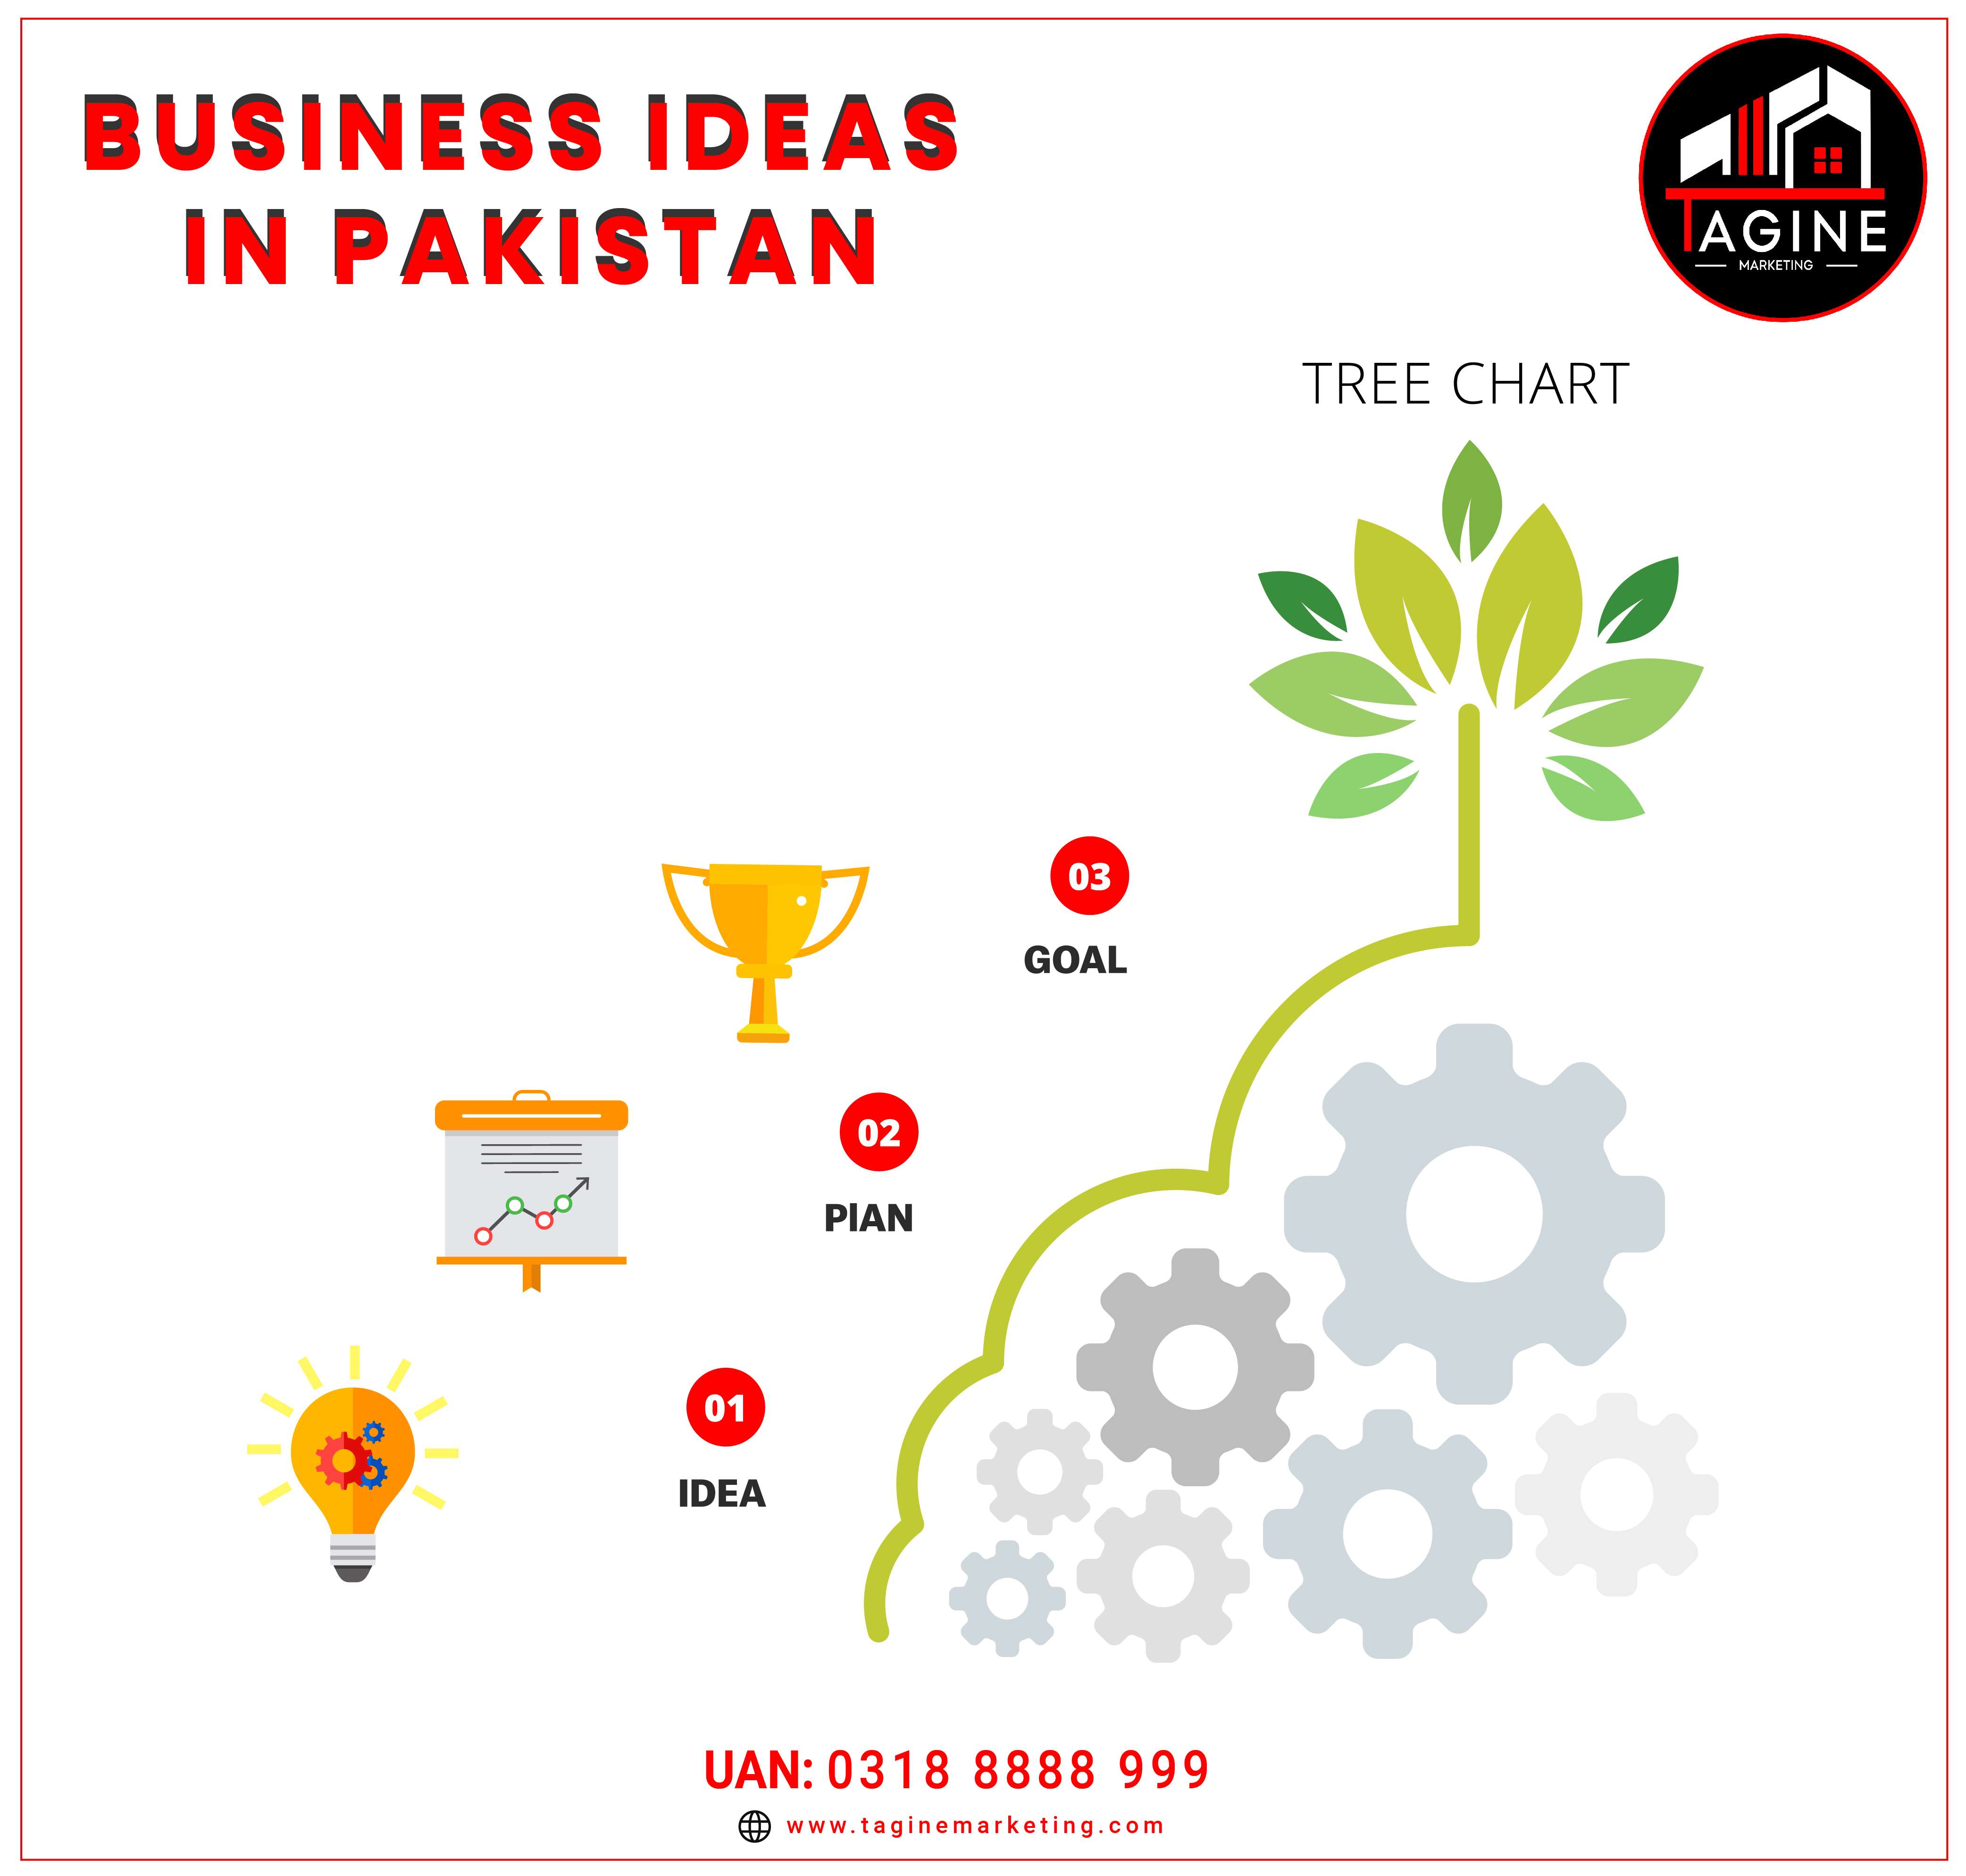 12 Business Ideas in Pakistan that you can start right away